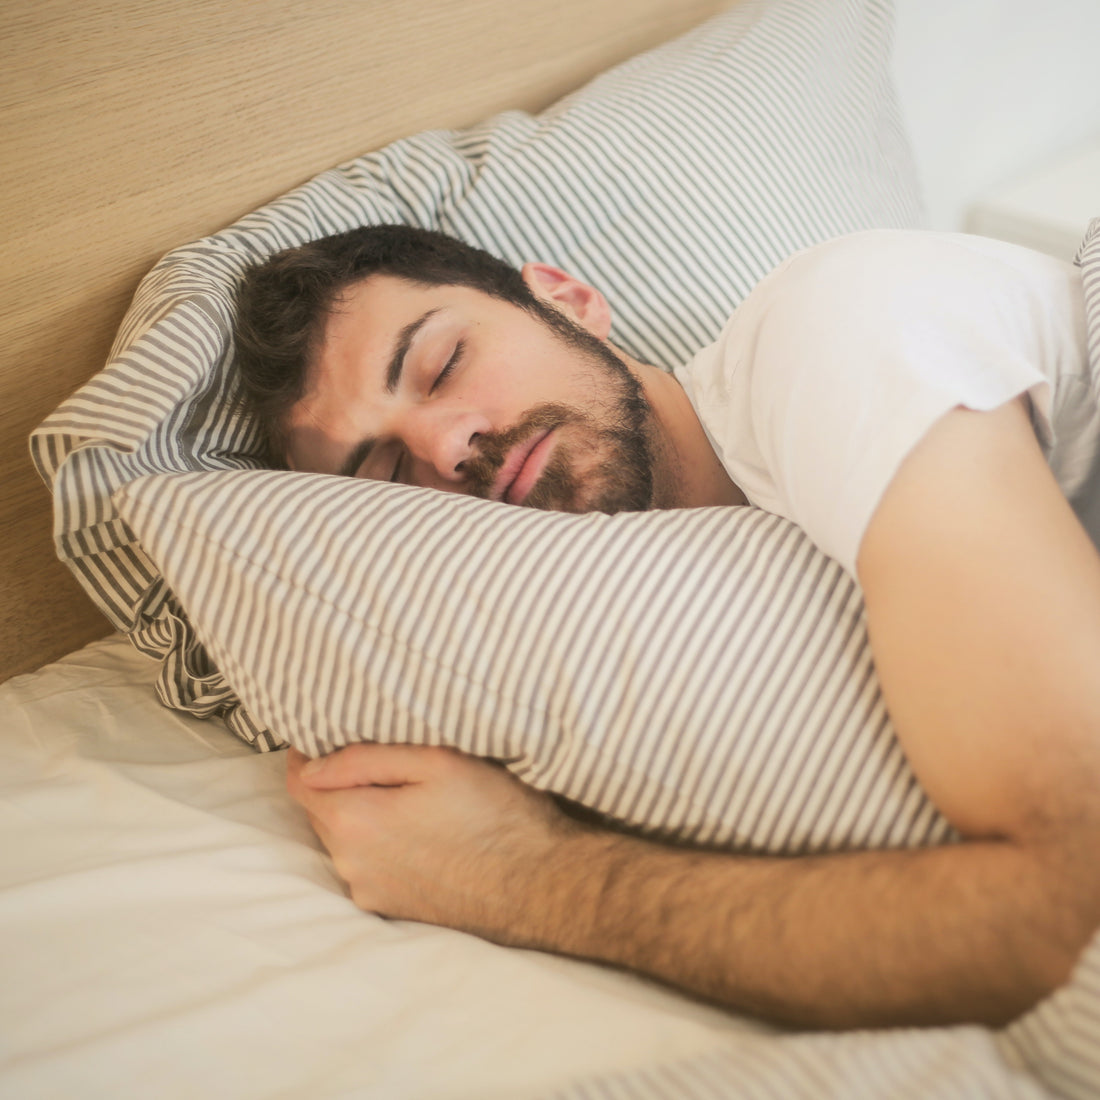 The Importance of Sleep for Weight Loss